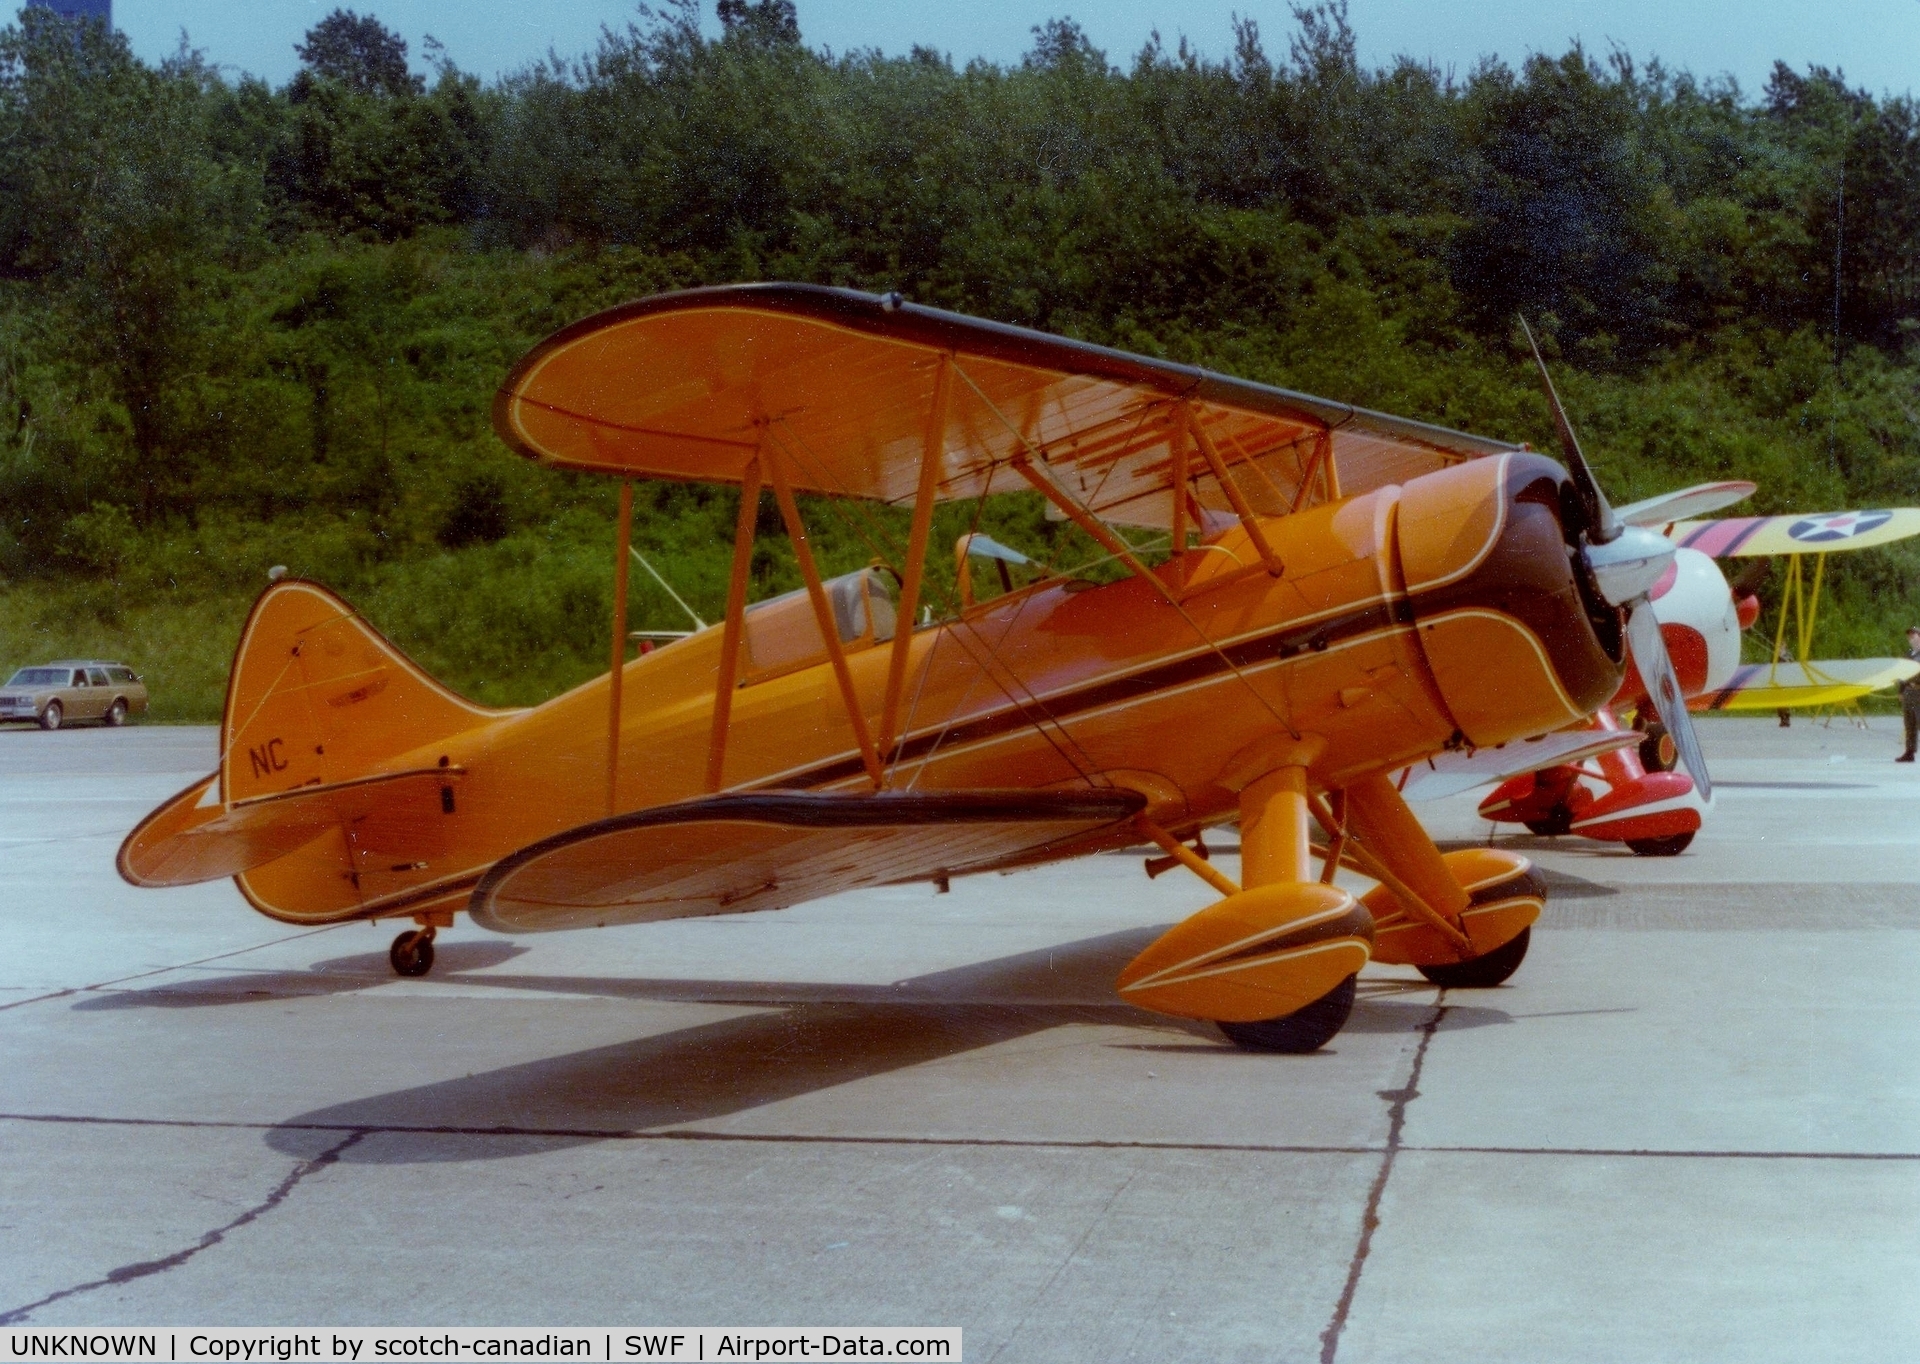 UNKNOWN, Miscellaneous Various C/N unknown, WACO Biplane at Stewart International Airport, Newburgh, NY - circa 1970's